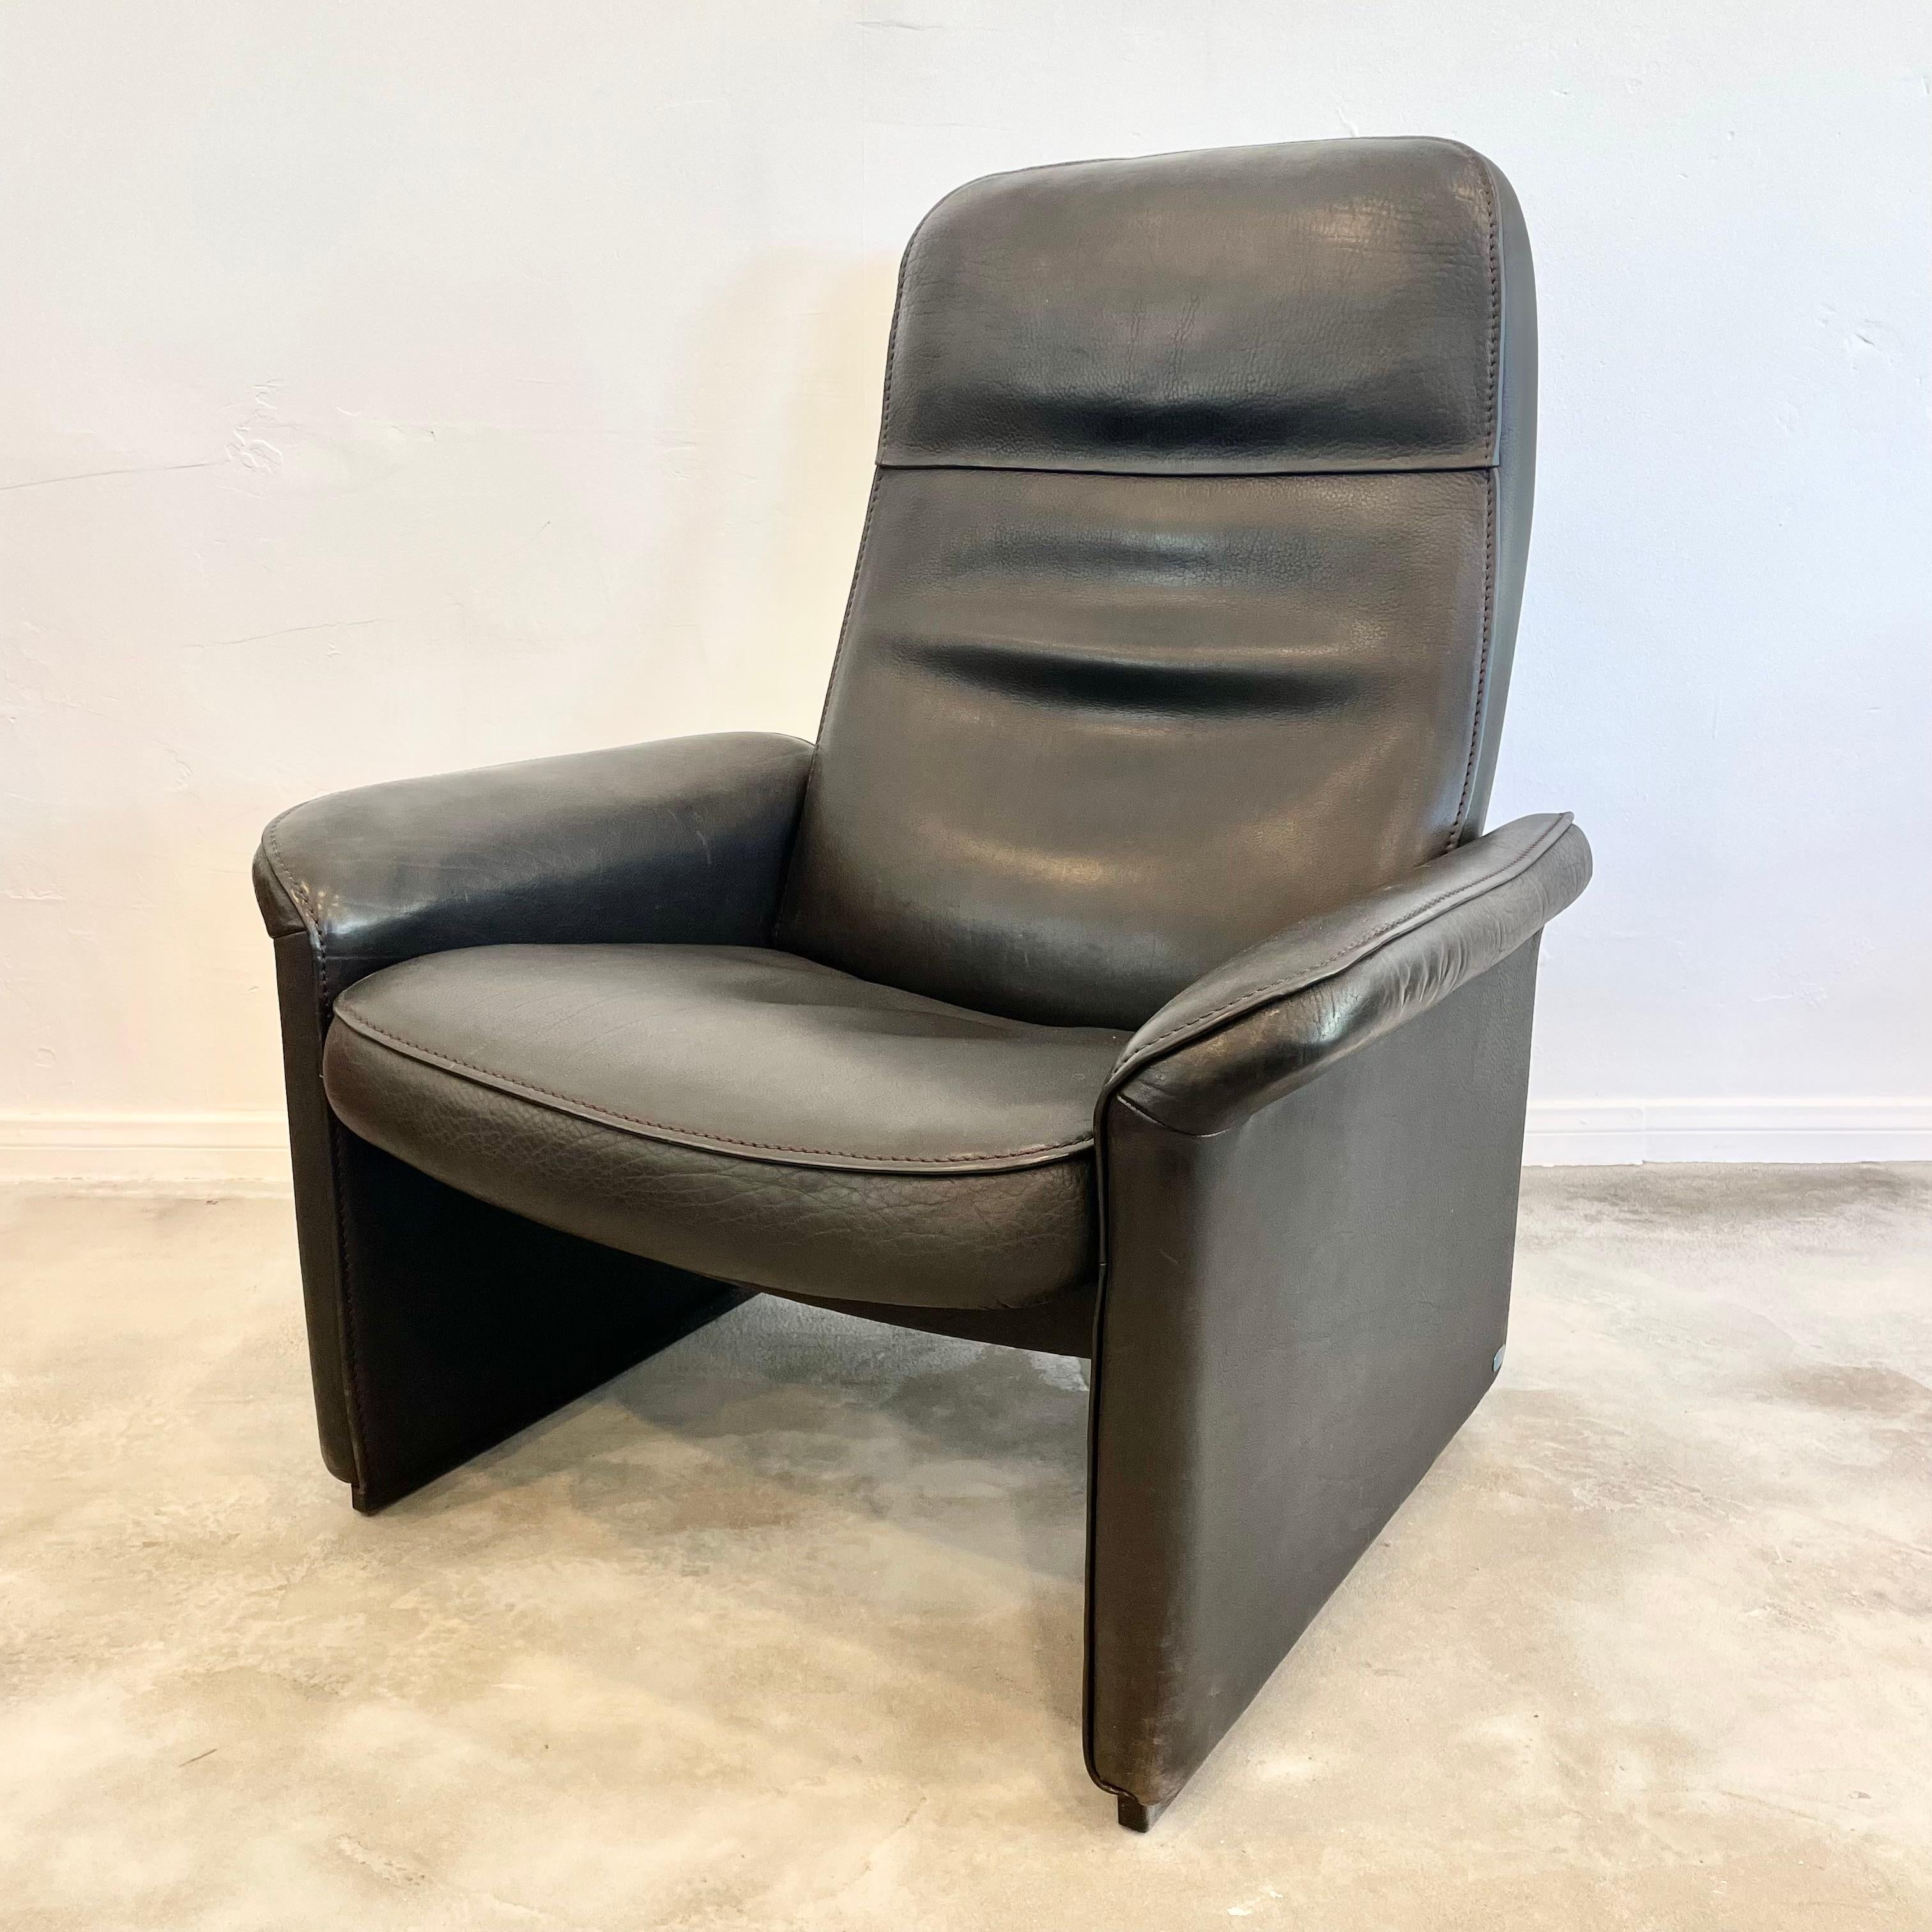 Pair of De Sede DS-50 Black Leather Recliner Chairs, 1970s Switzerland For Sale 2